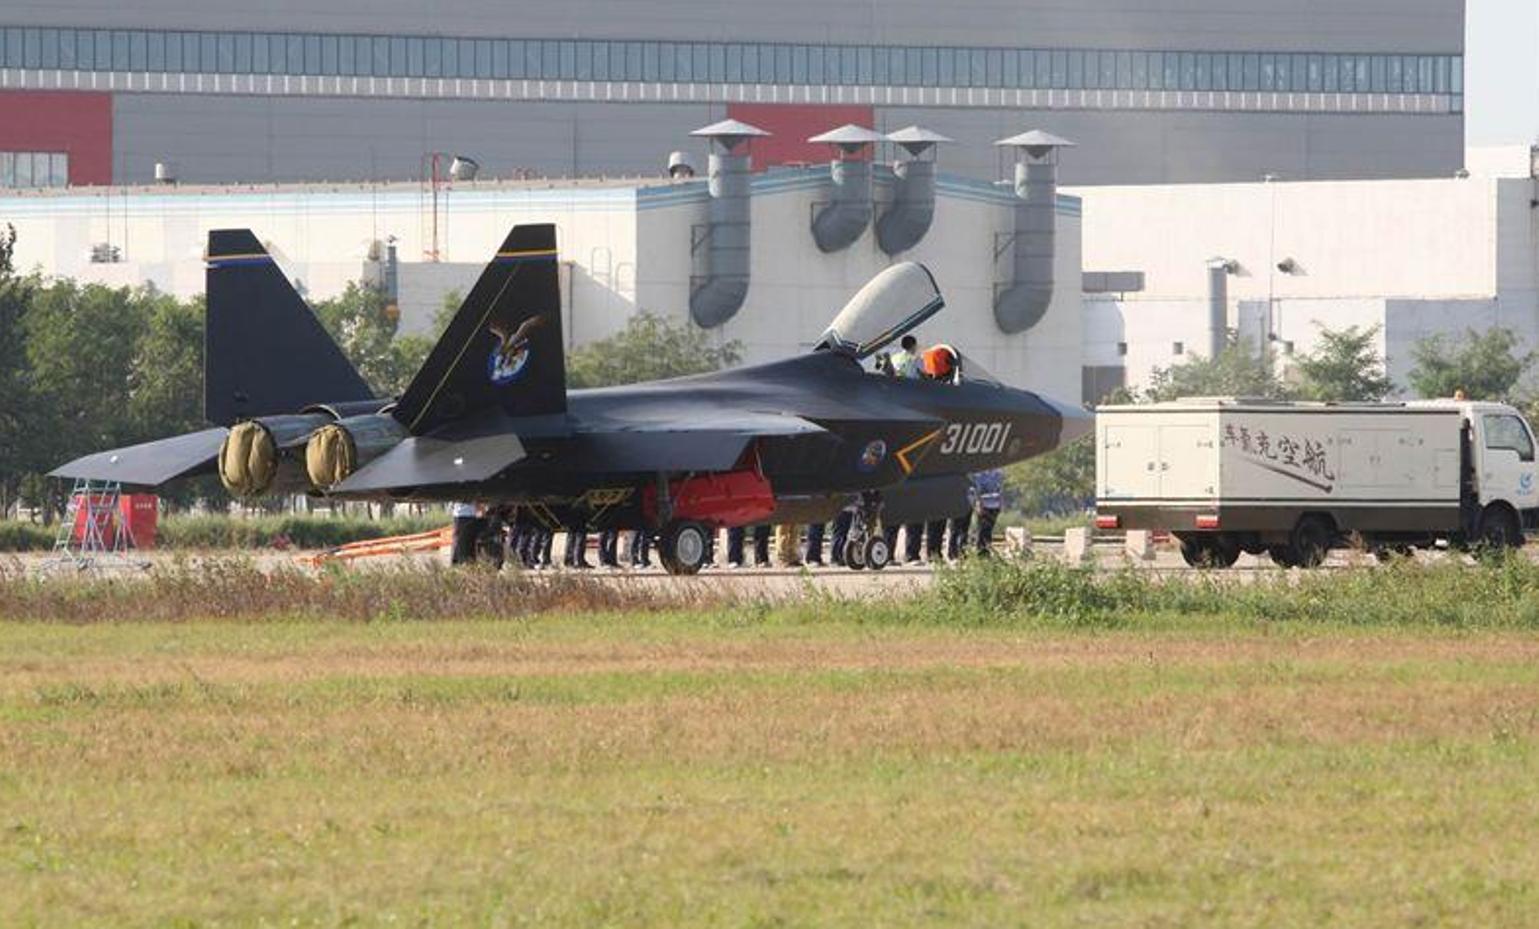 Shenyang J-31 New+J-31+60+17+18+212+25++fifth+generation+stealth+export+paf+pakistan++fighter+aircraft+prototype+People's+Liberation+Army+Air+Force++OPERATIONAL+pl-10+12+aam+bvr+missile+ls+pgm+gps+LS6